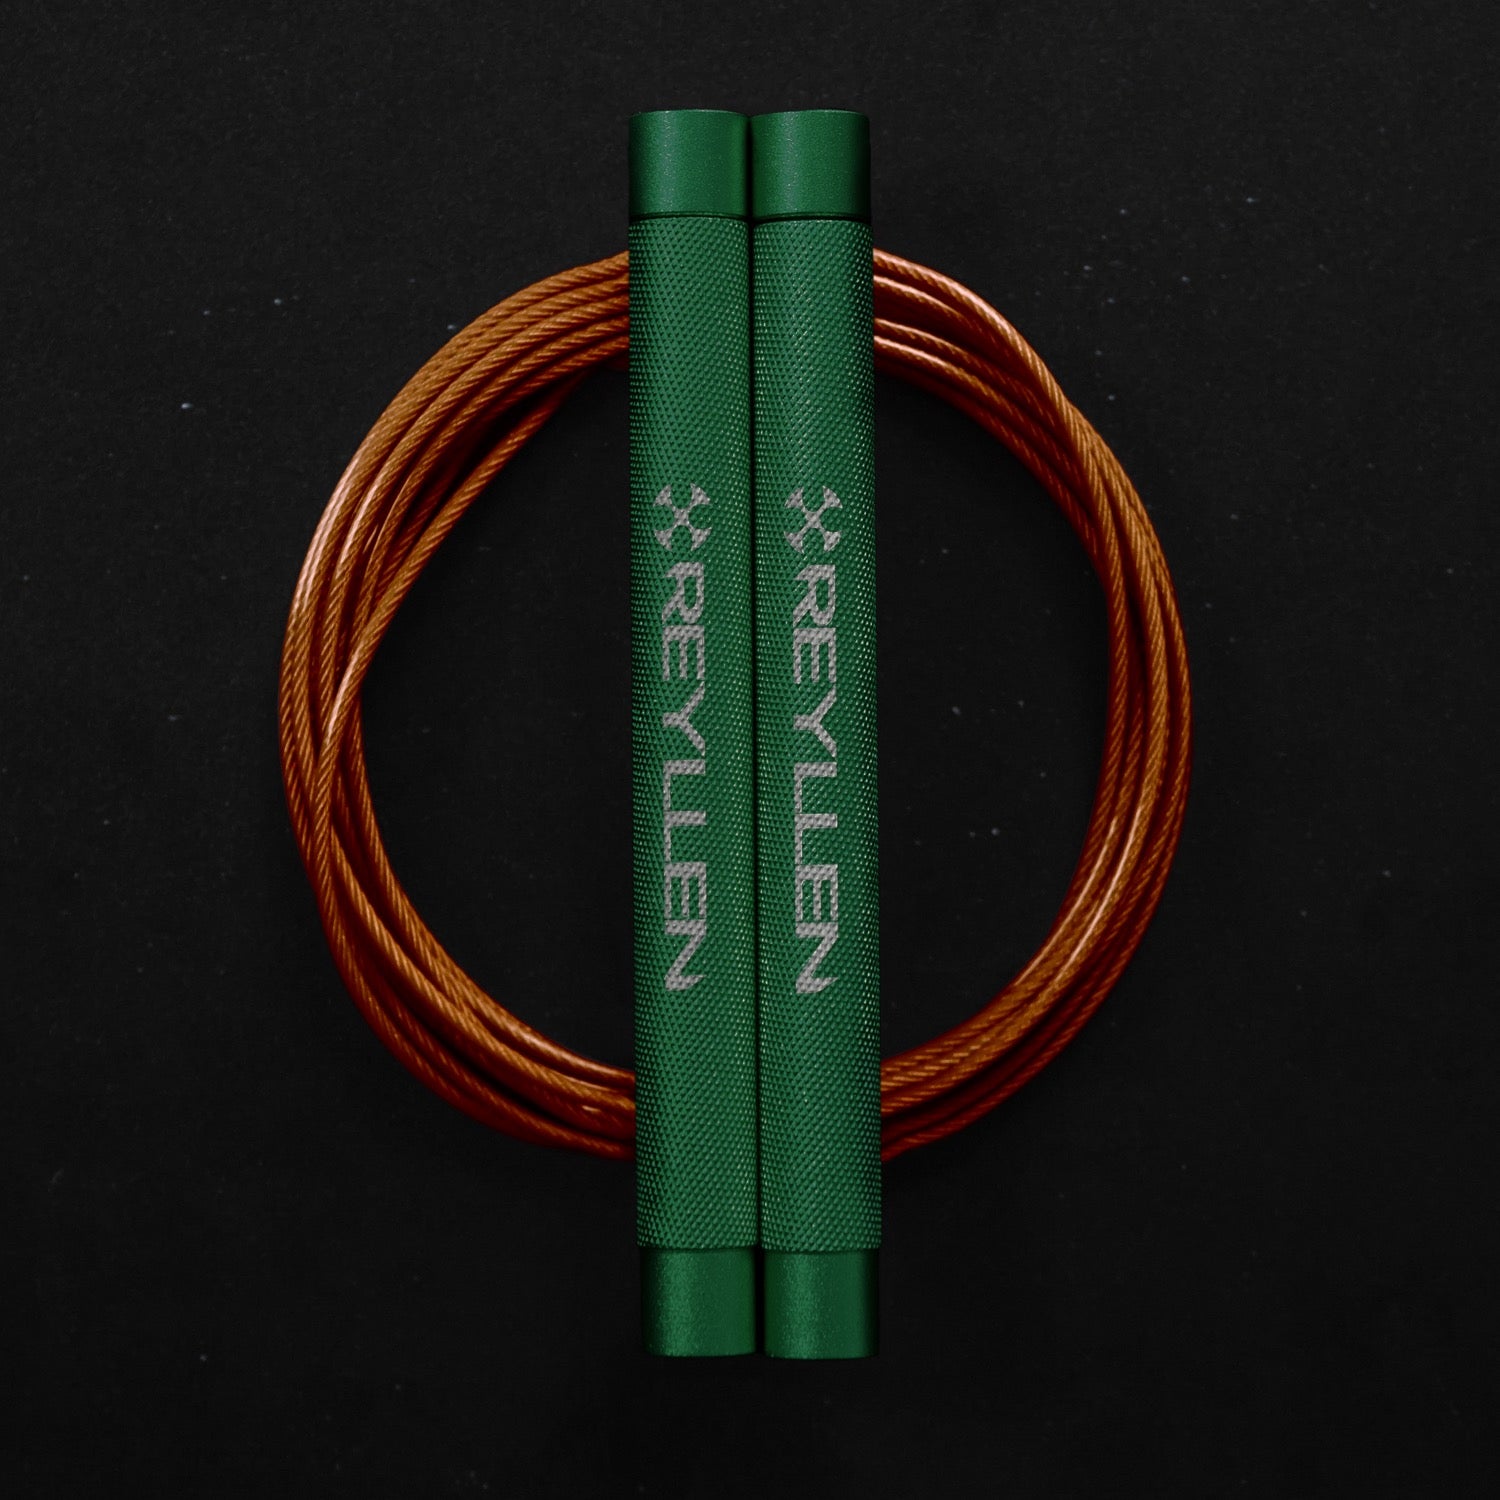 Reyllen Flare Mx Speed Skipping Jump Rope - Aluminium Handles - green with orange pvc coated cable